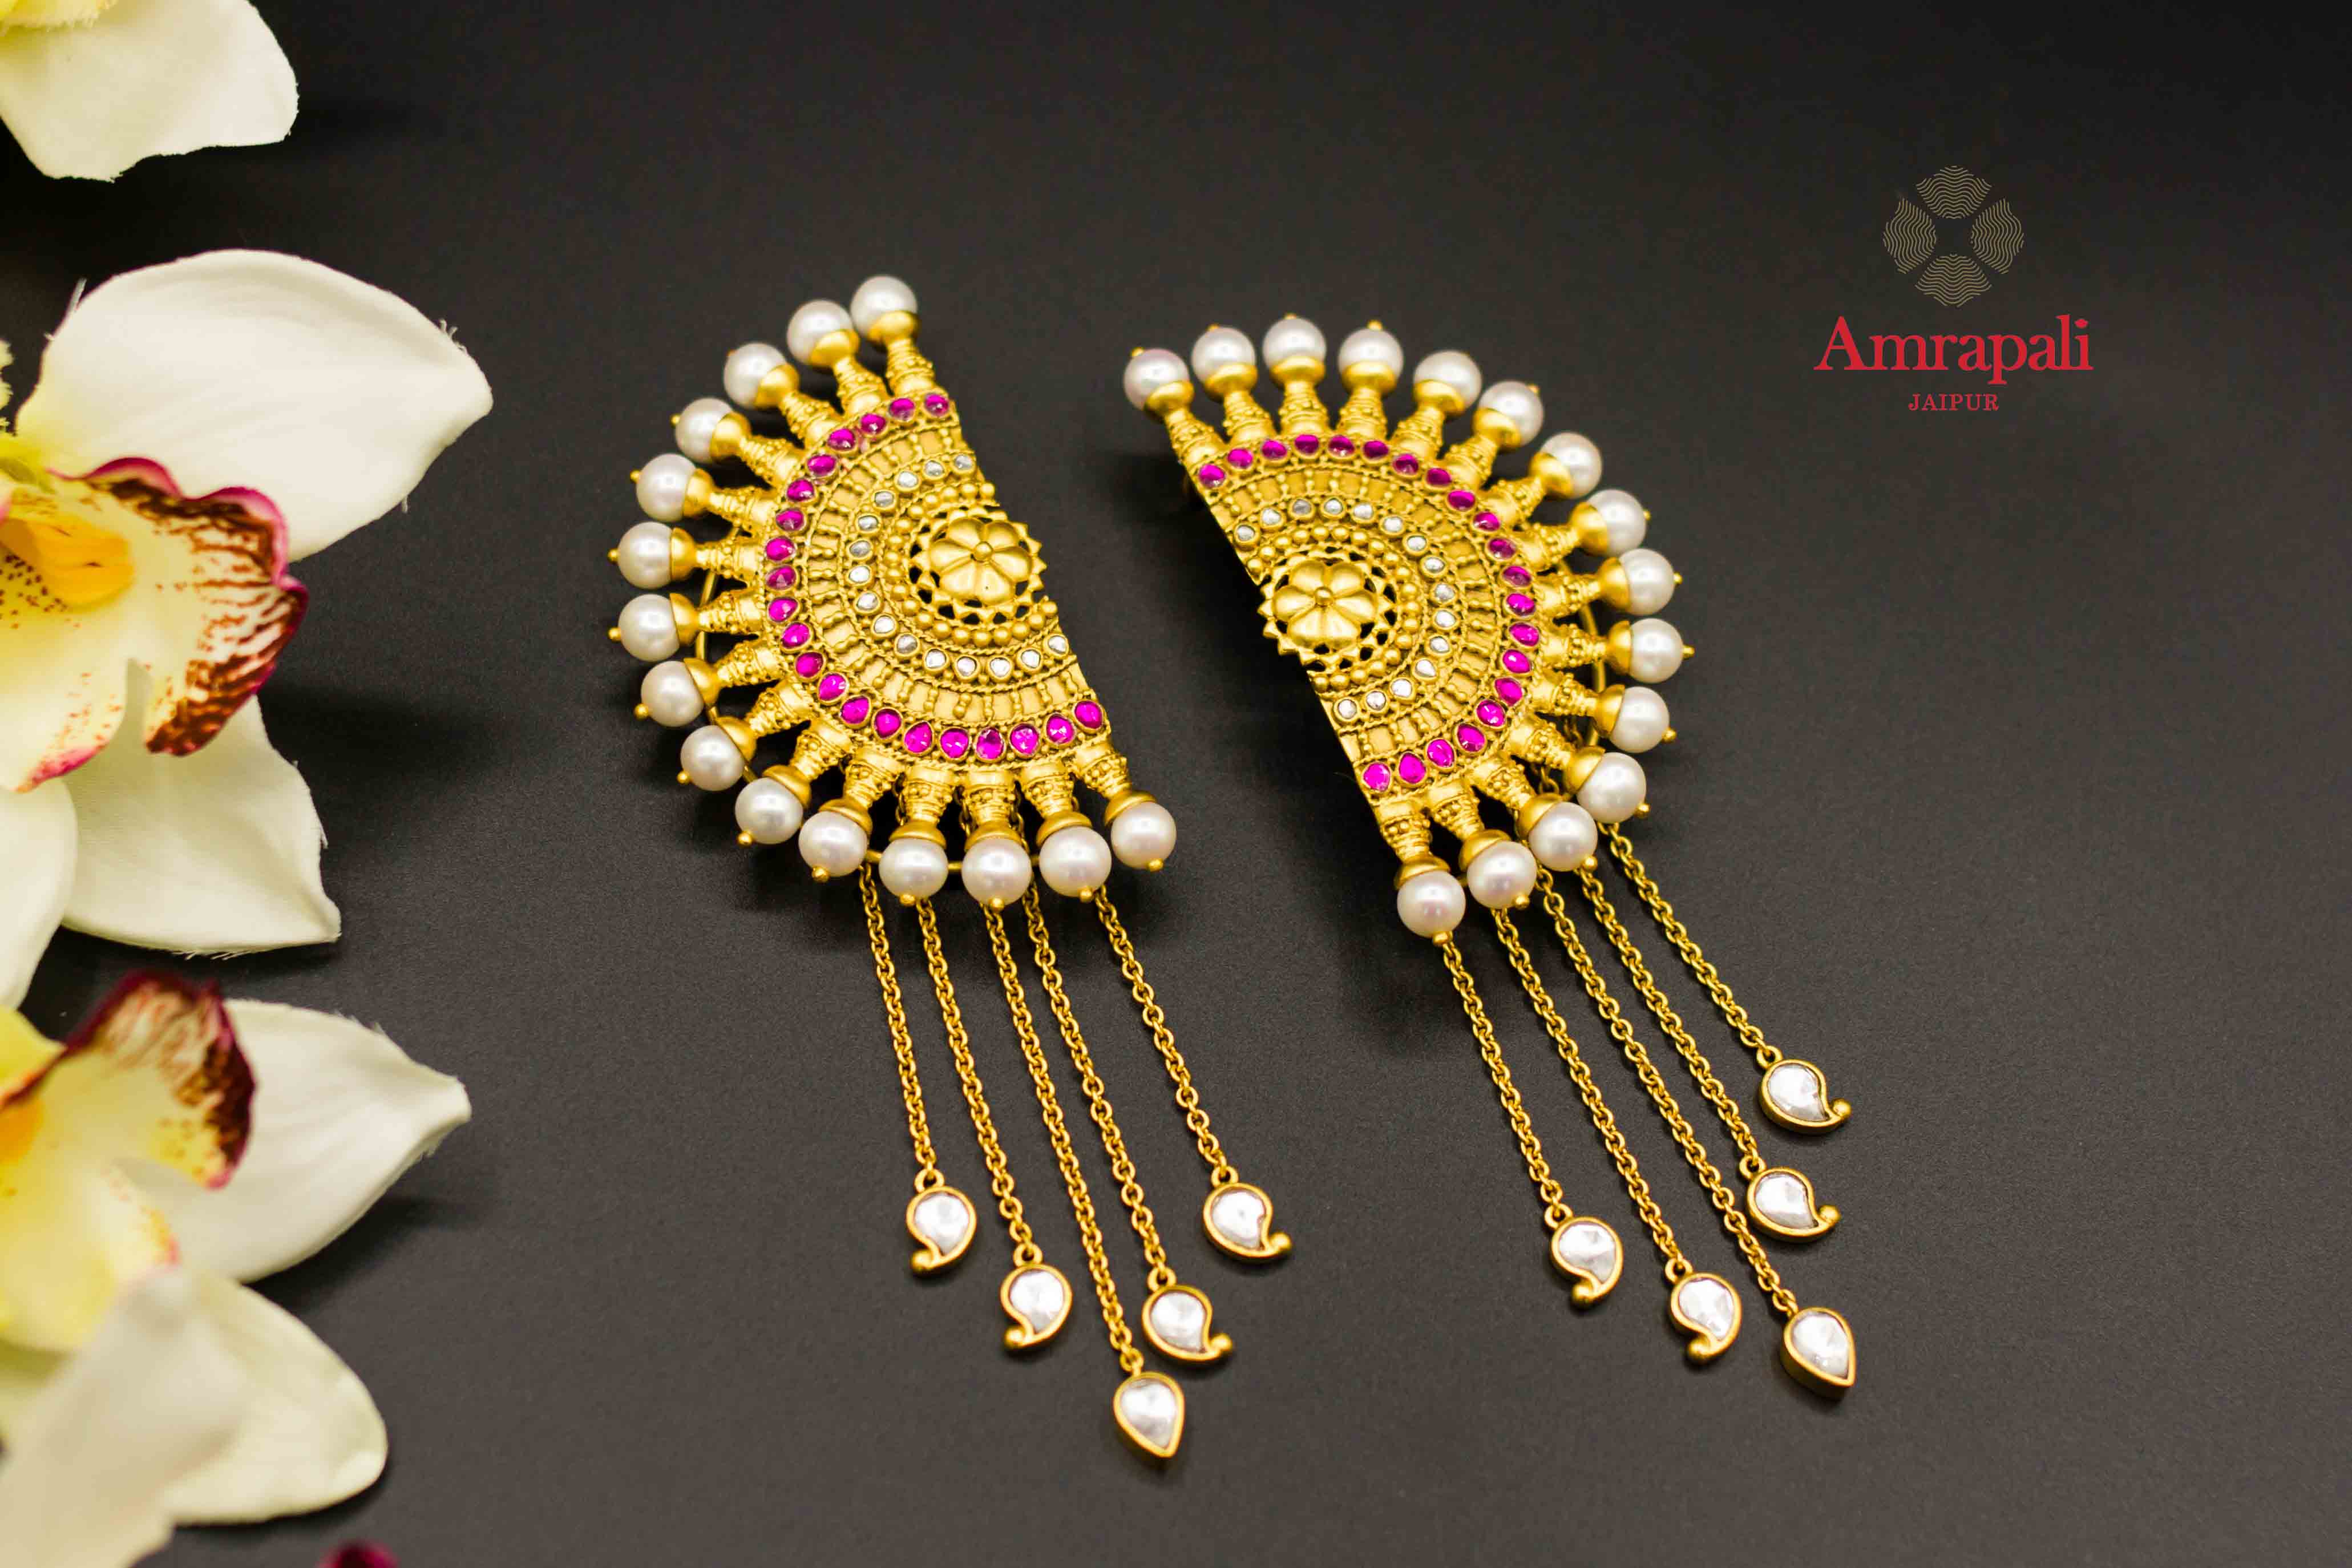 Buy Amrapali silver gold plated chakra ambi ear cuffs online in USA. Raise your ethnic style quotient on special occasions with exquisite Indian jewelry from Pure Elegance Indian clothing store in USA. Enhance your Indian look with silver gold plated jewelry, necklaces, fashion jewelry available online.-flatlay